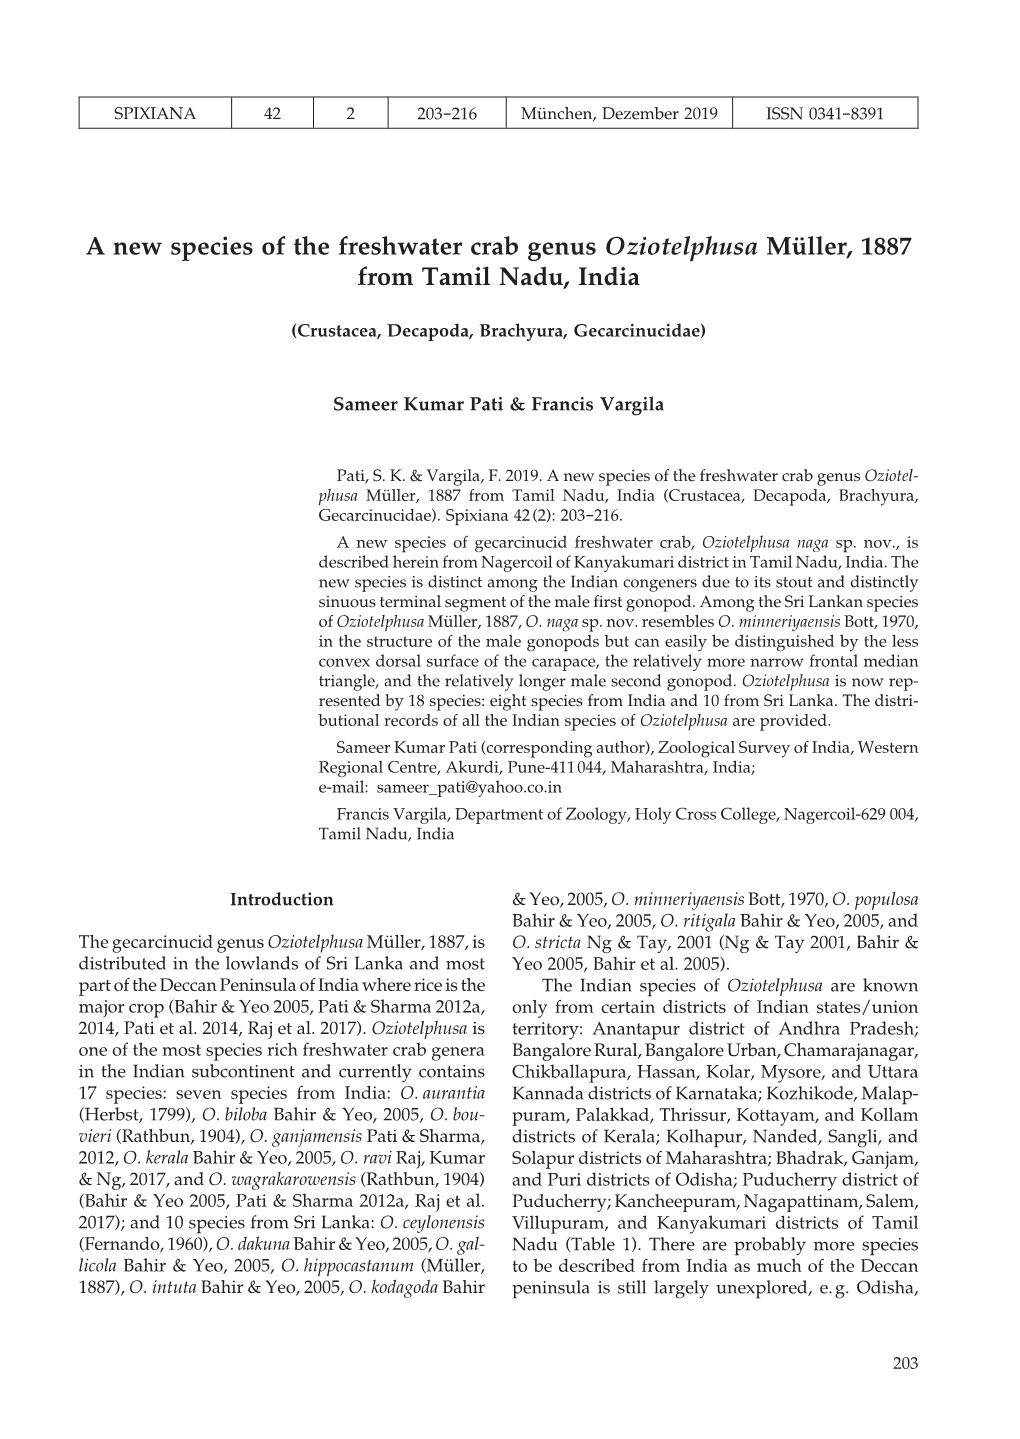 A New Species of the Freshwater Crab Genus Oziotelphusa Müller, 1887 from Tamil Nadu, India